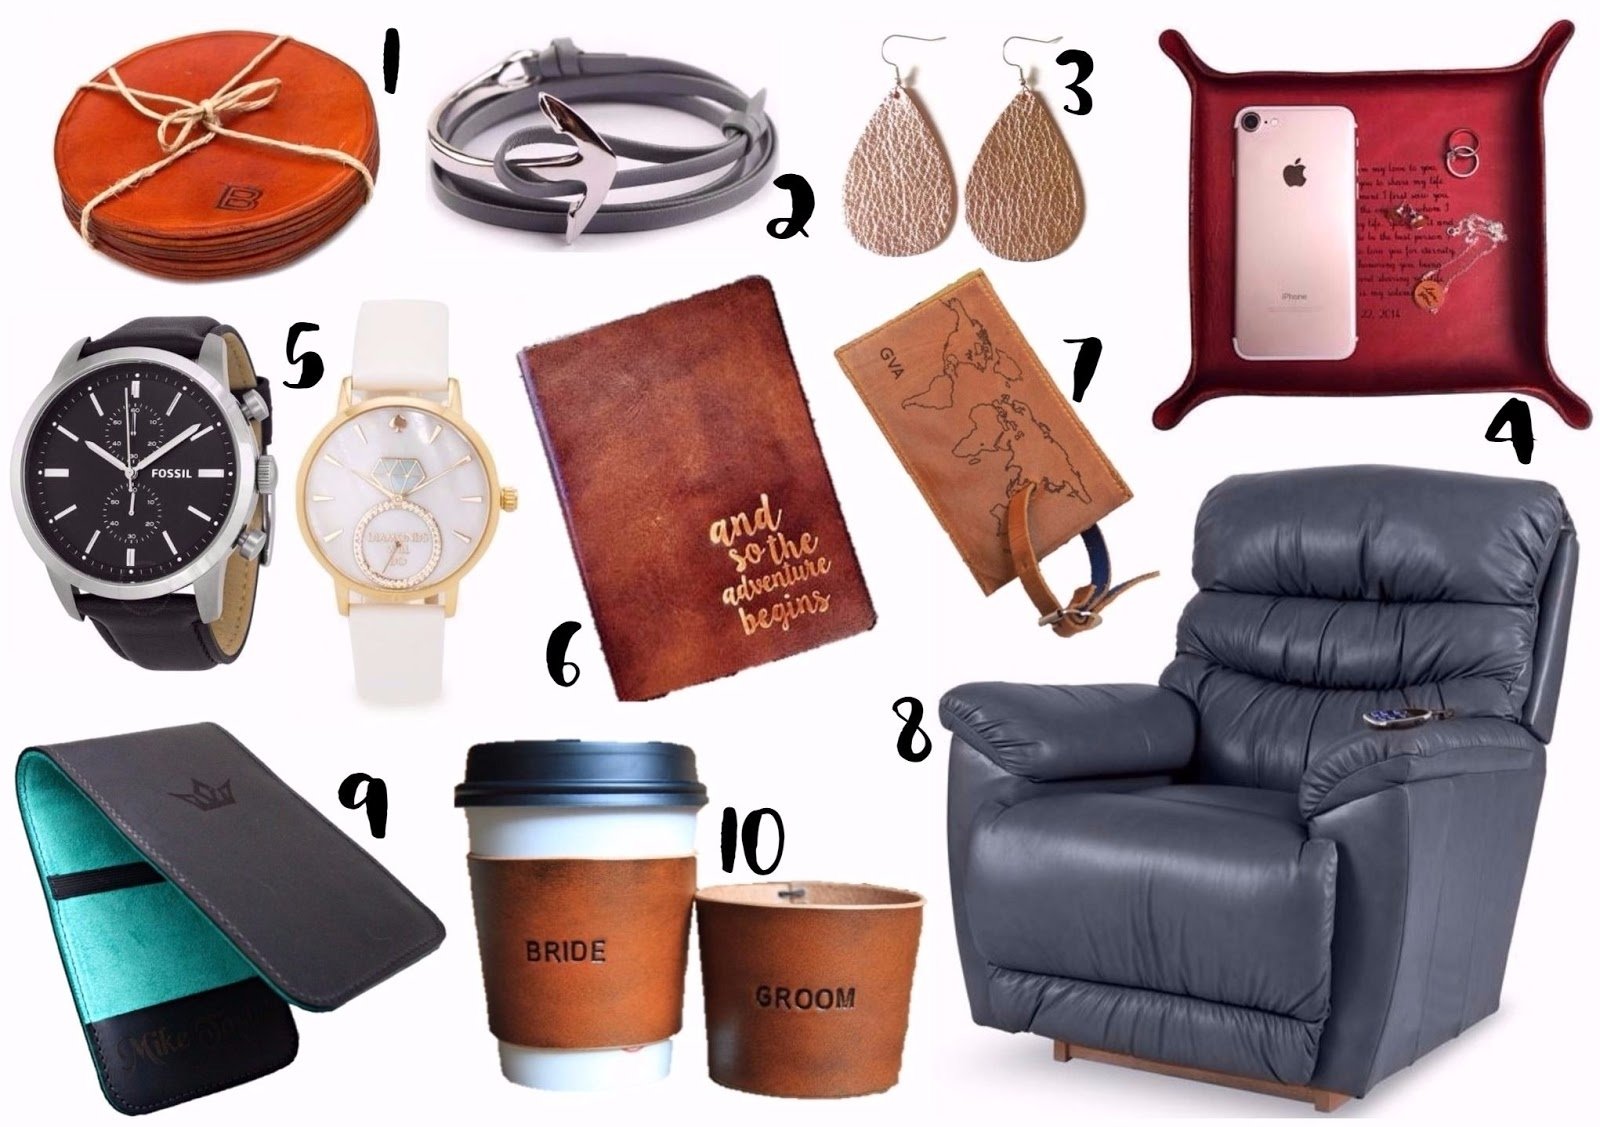 10 Amazing Leather Anniversary Gift Ideas For Him borrowed heaven third anniversary gifts leather 2 2022